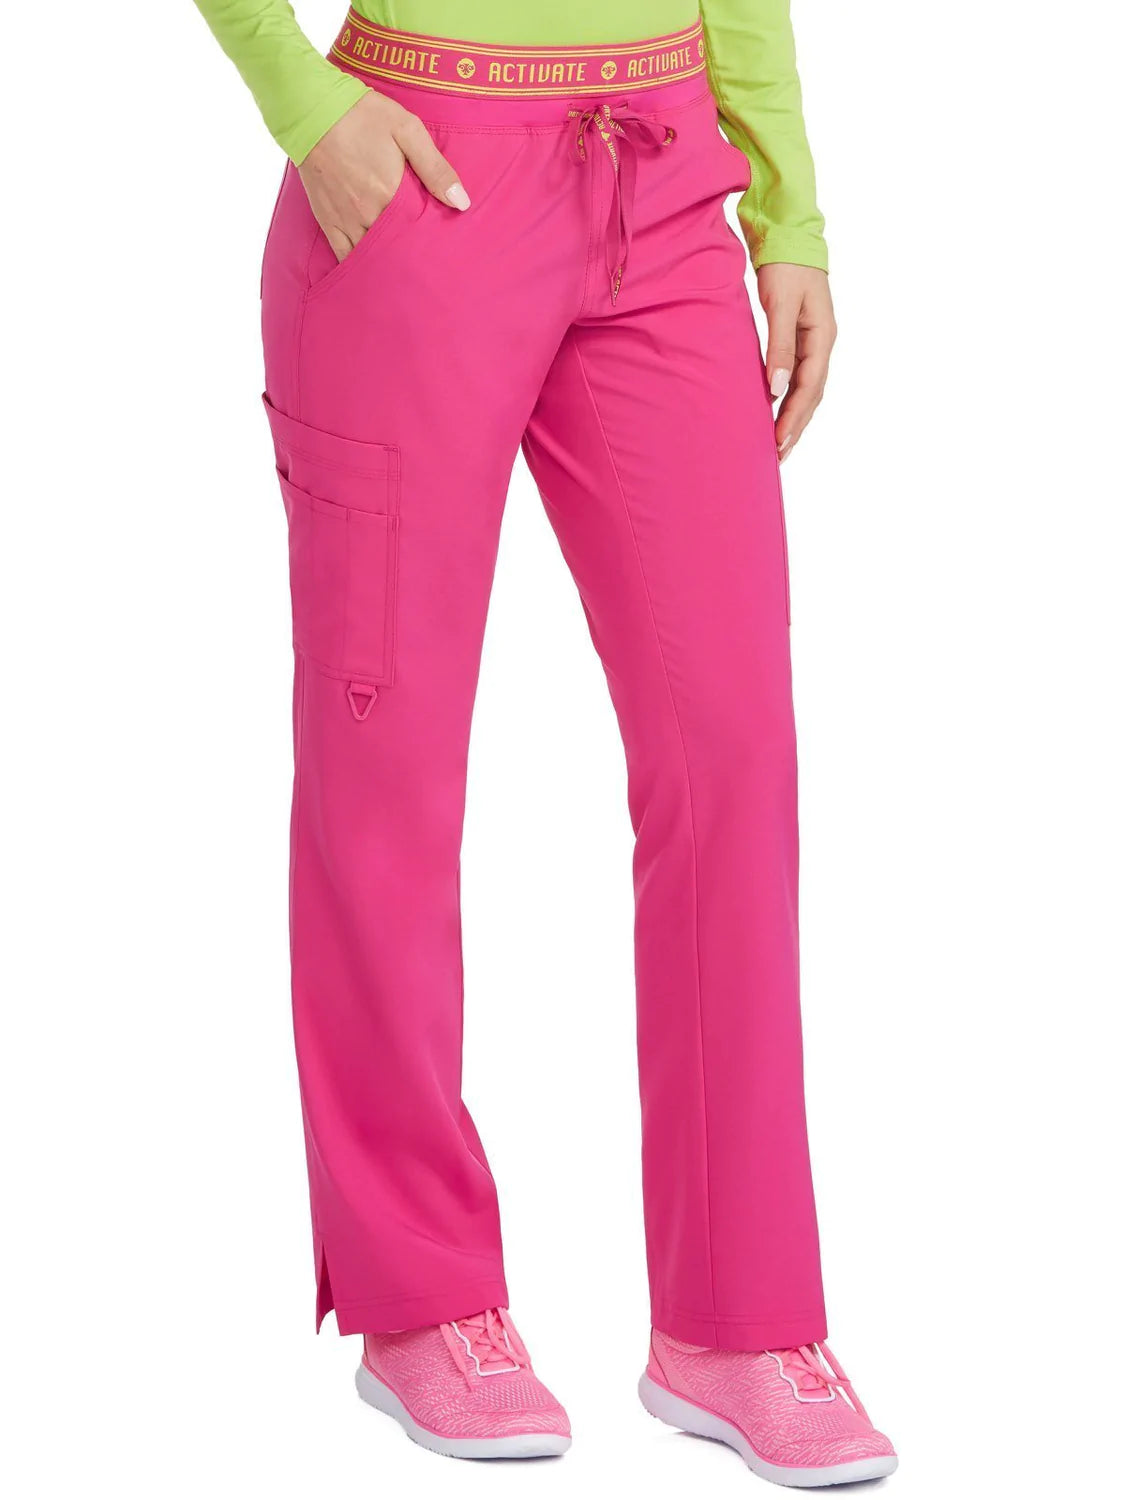 MED COUTURE 8758 YOGA 2 CARGO POCKET PANT